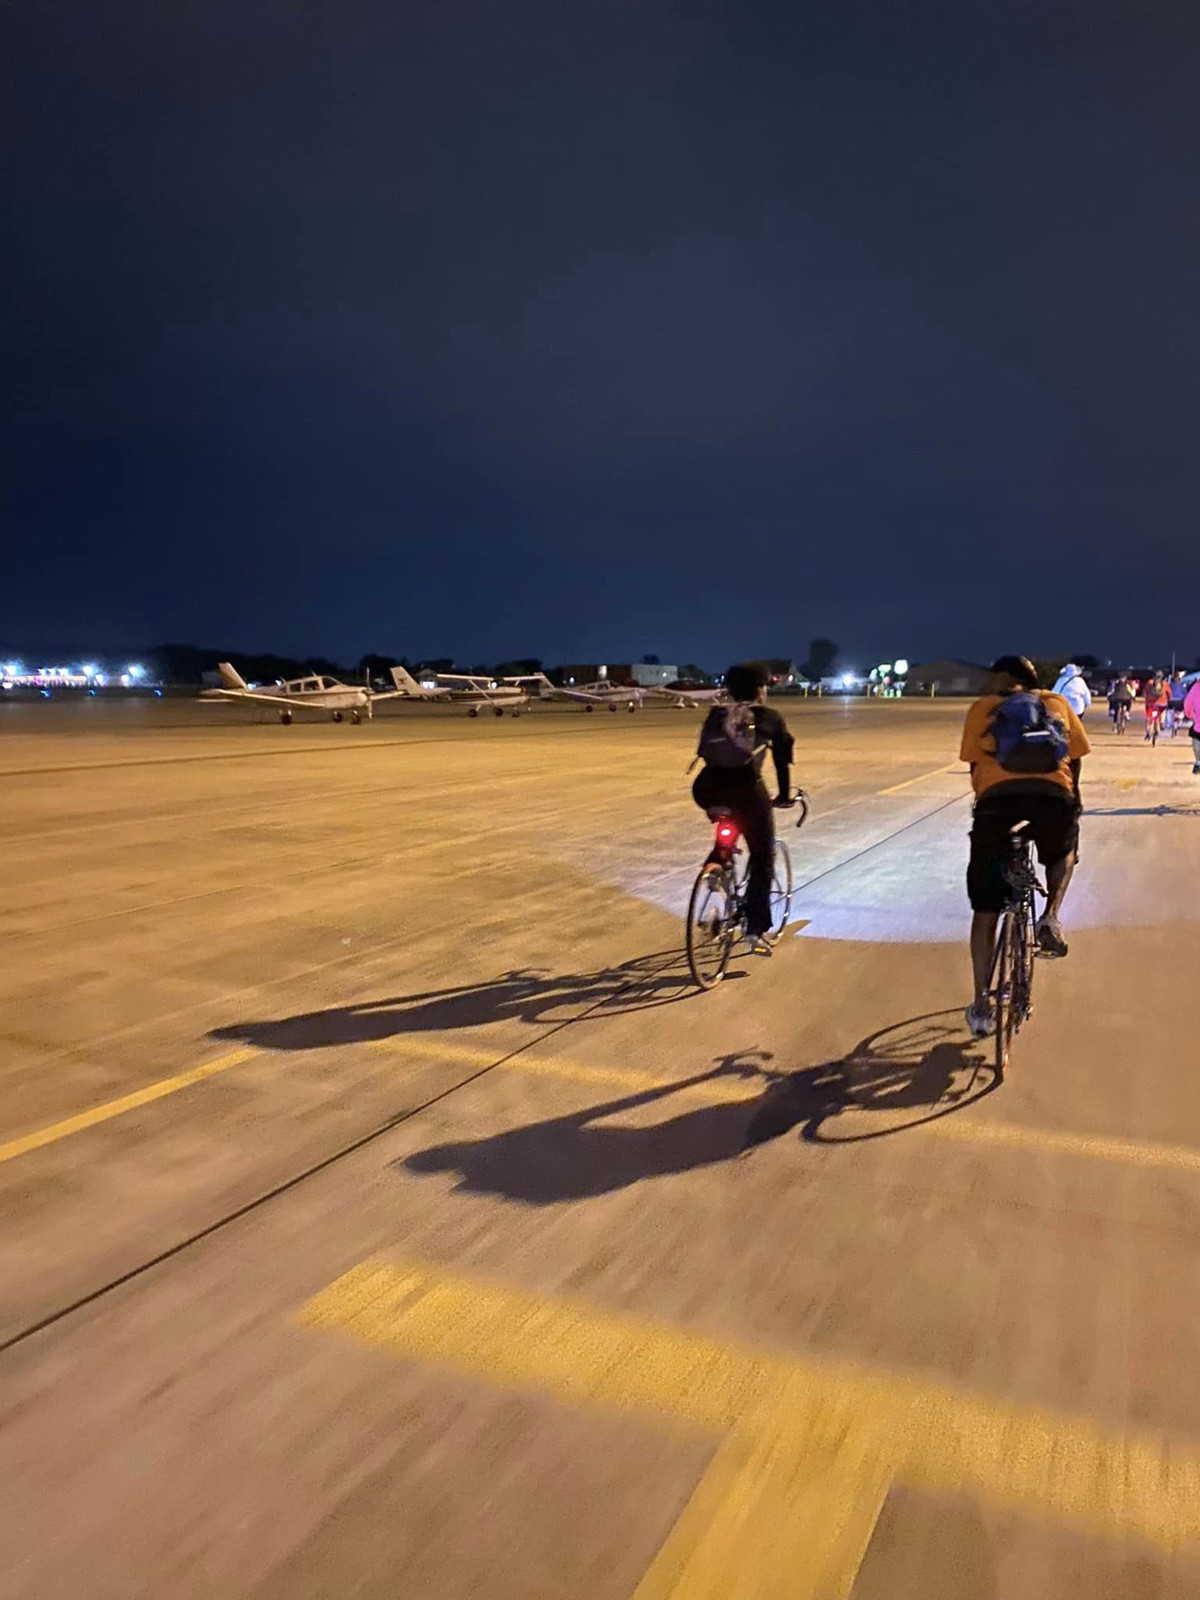 The second leg of the trip took bikers to the Lansing Municipal Airport, where they biked along the taxiway. (Photo: Sally Blom)